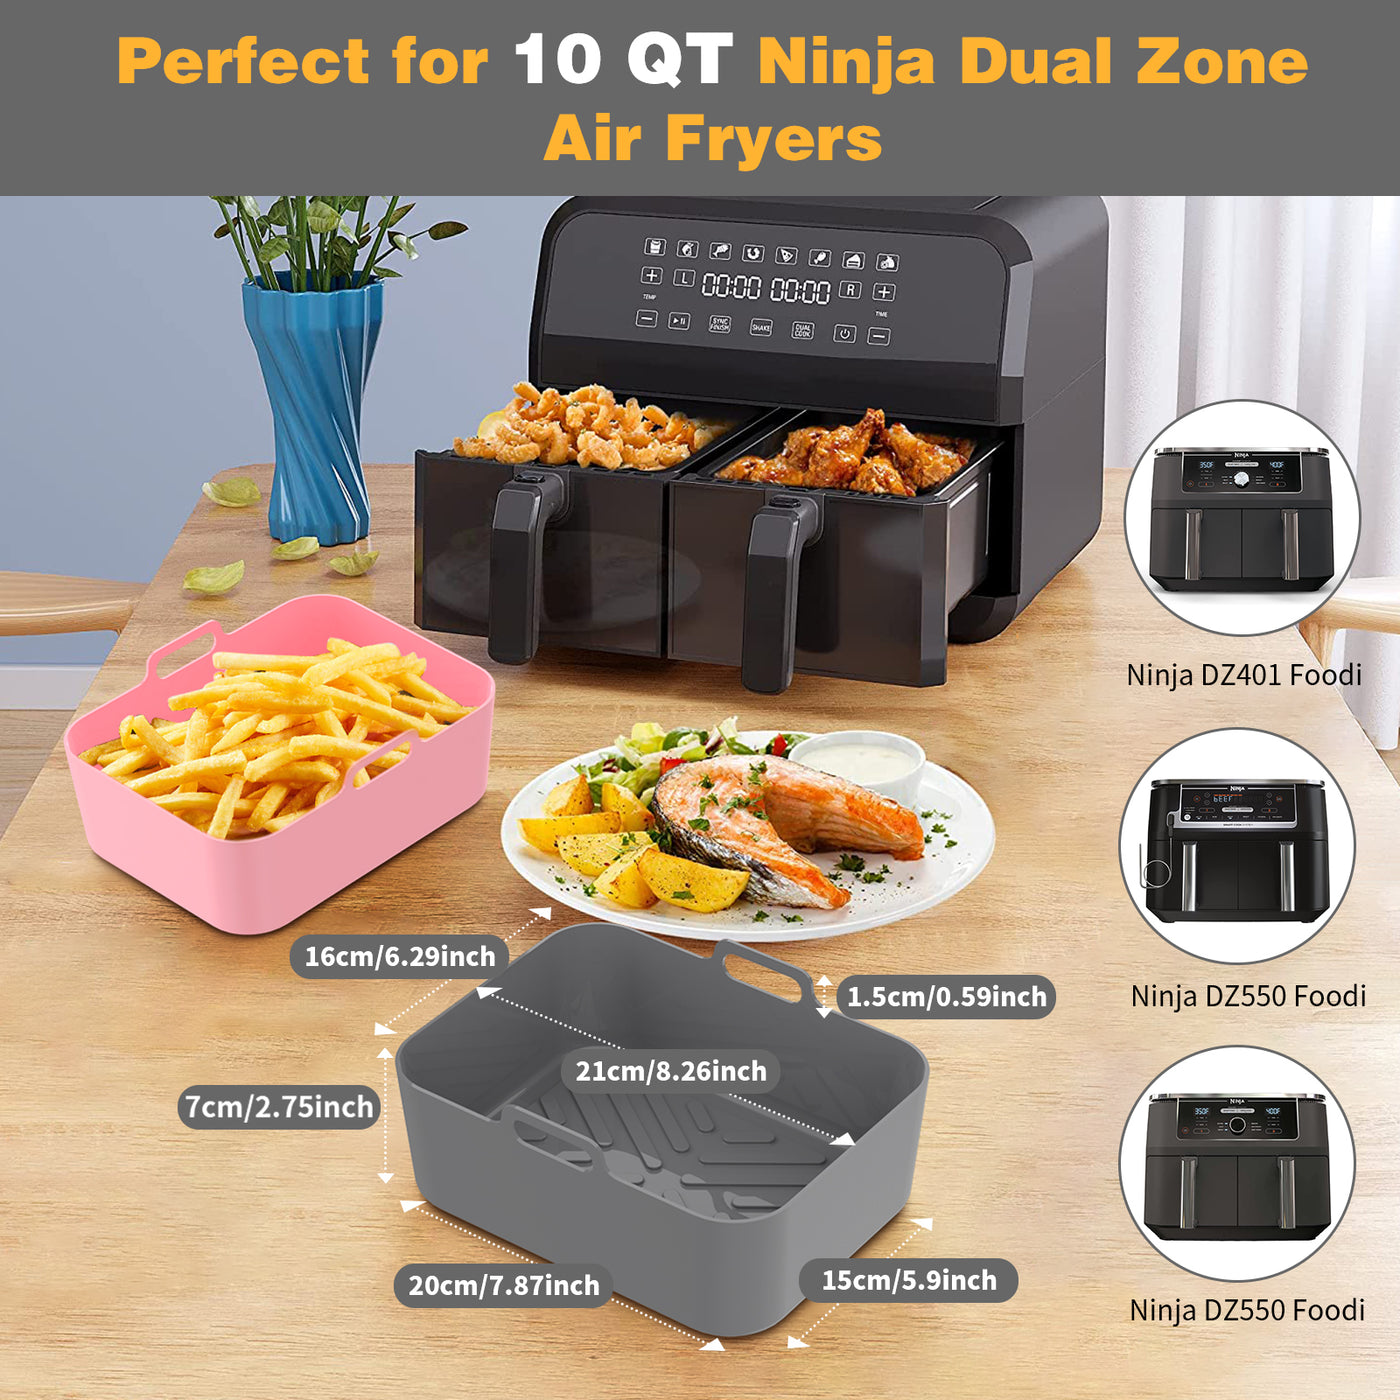 OUTXE 2-Pack 10 QT Silicone Air Fryer Liners for Ninja Dual Zone DZ401/DZ550, Reusable Rectangle Air Fryers Silicone Pot Inserts for Oven Microwave Accessories (Grey+Pink)